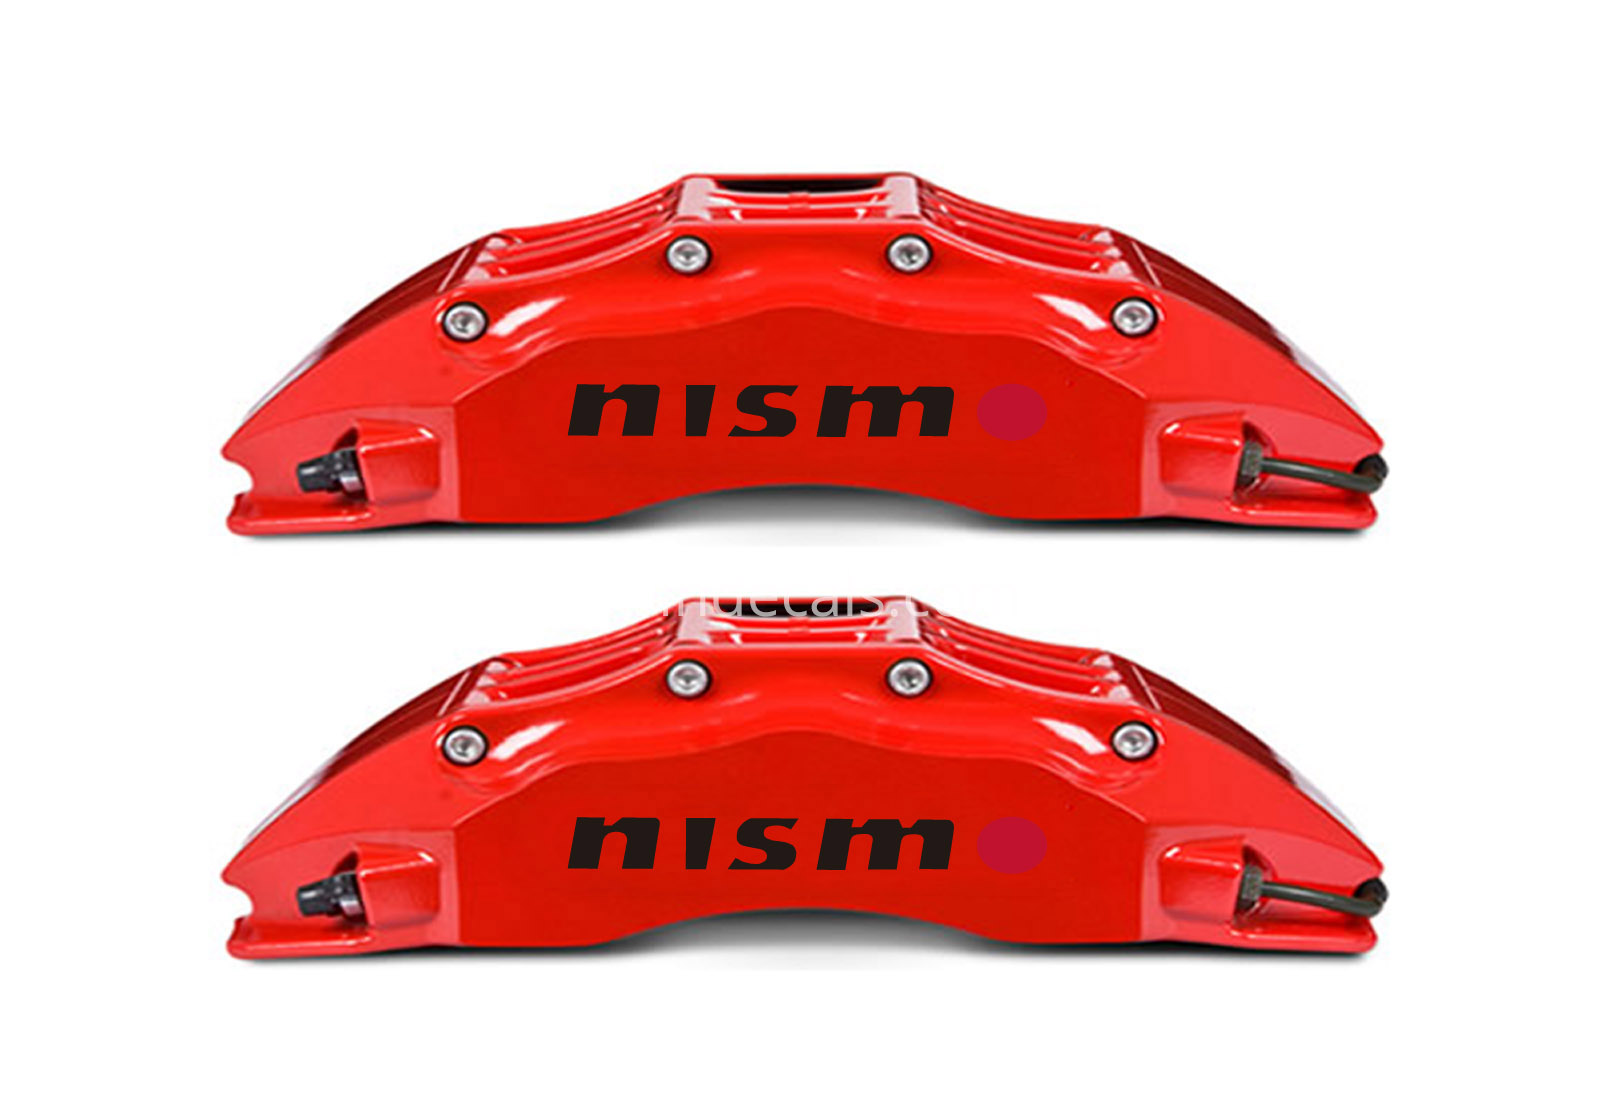 6 x Nismo Stickers for Brakes - Black